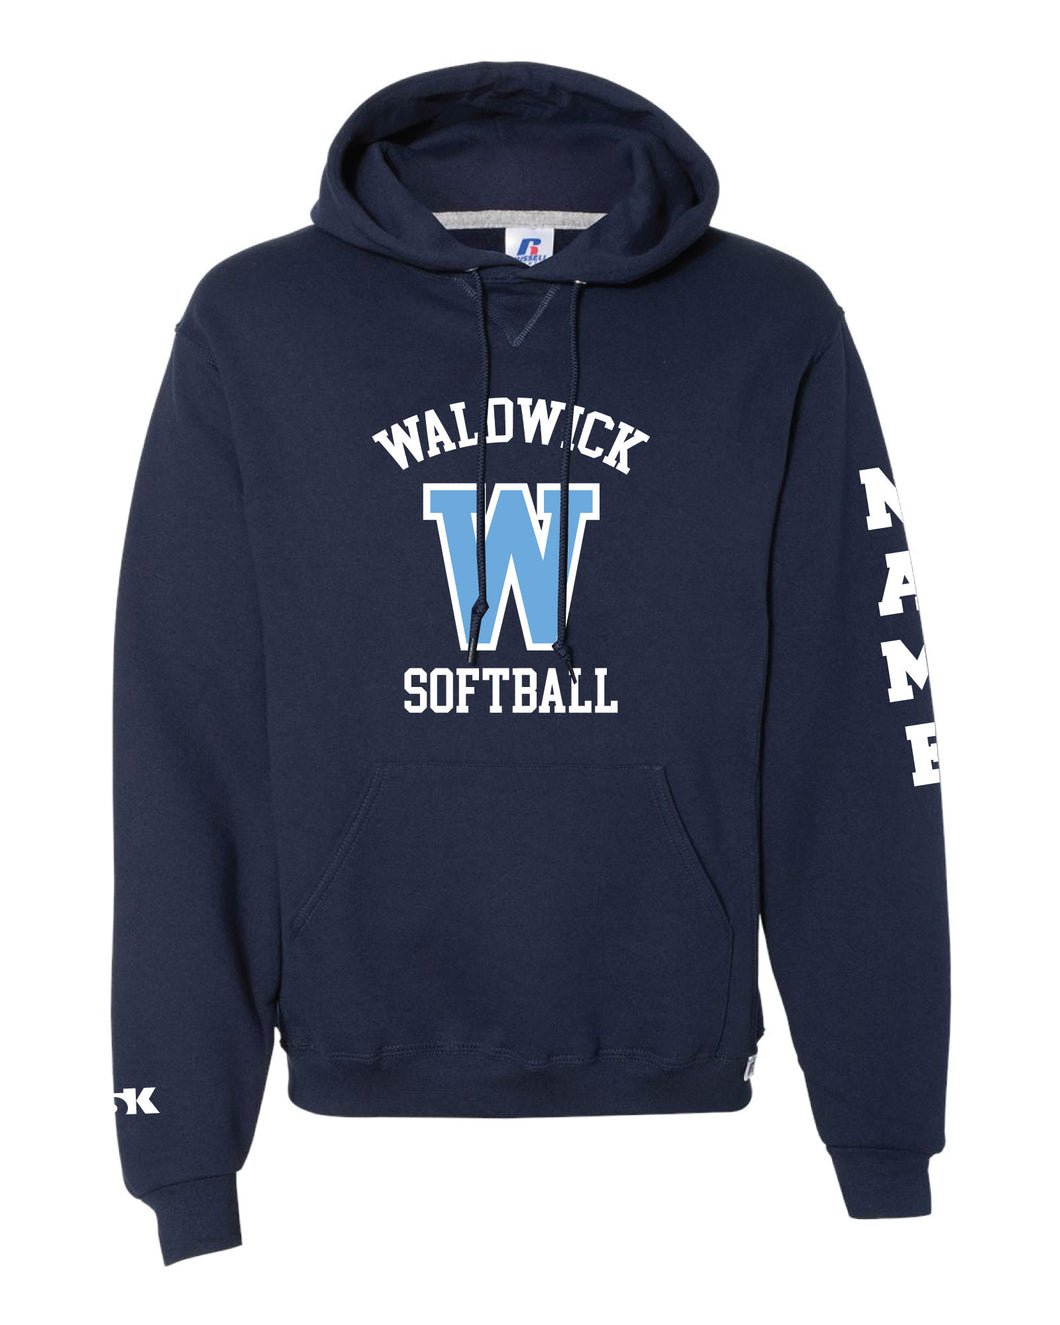 Waldwick Softball Russell Athletic Cotton Hoodie - Navy